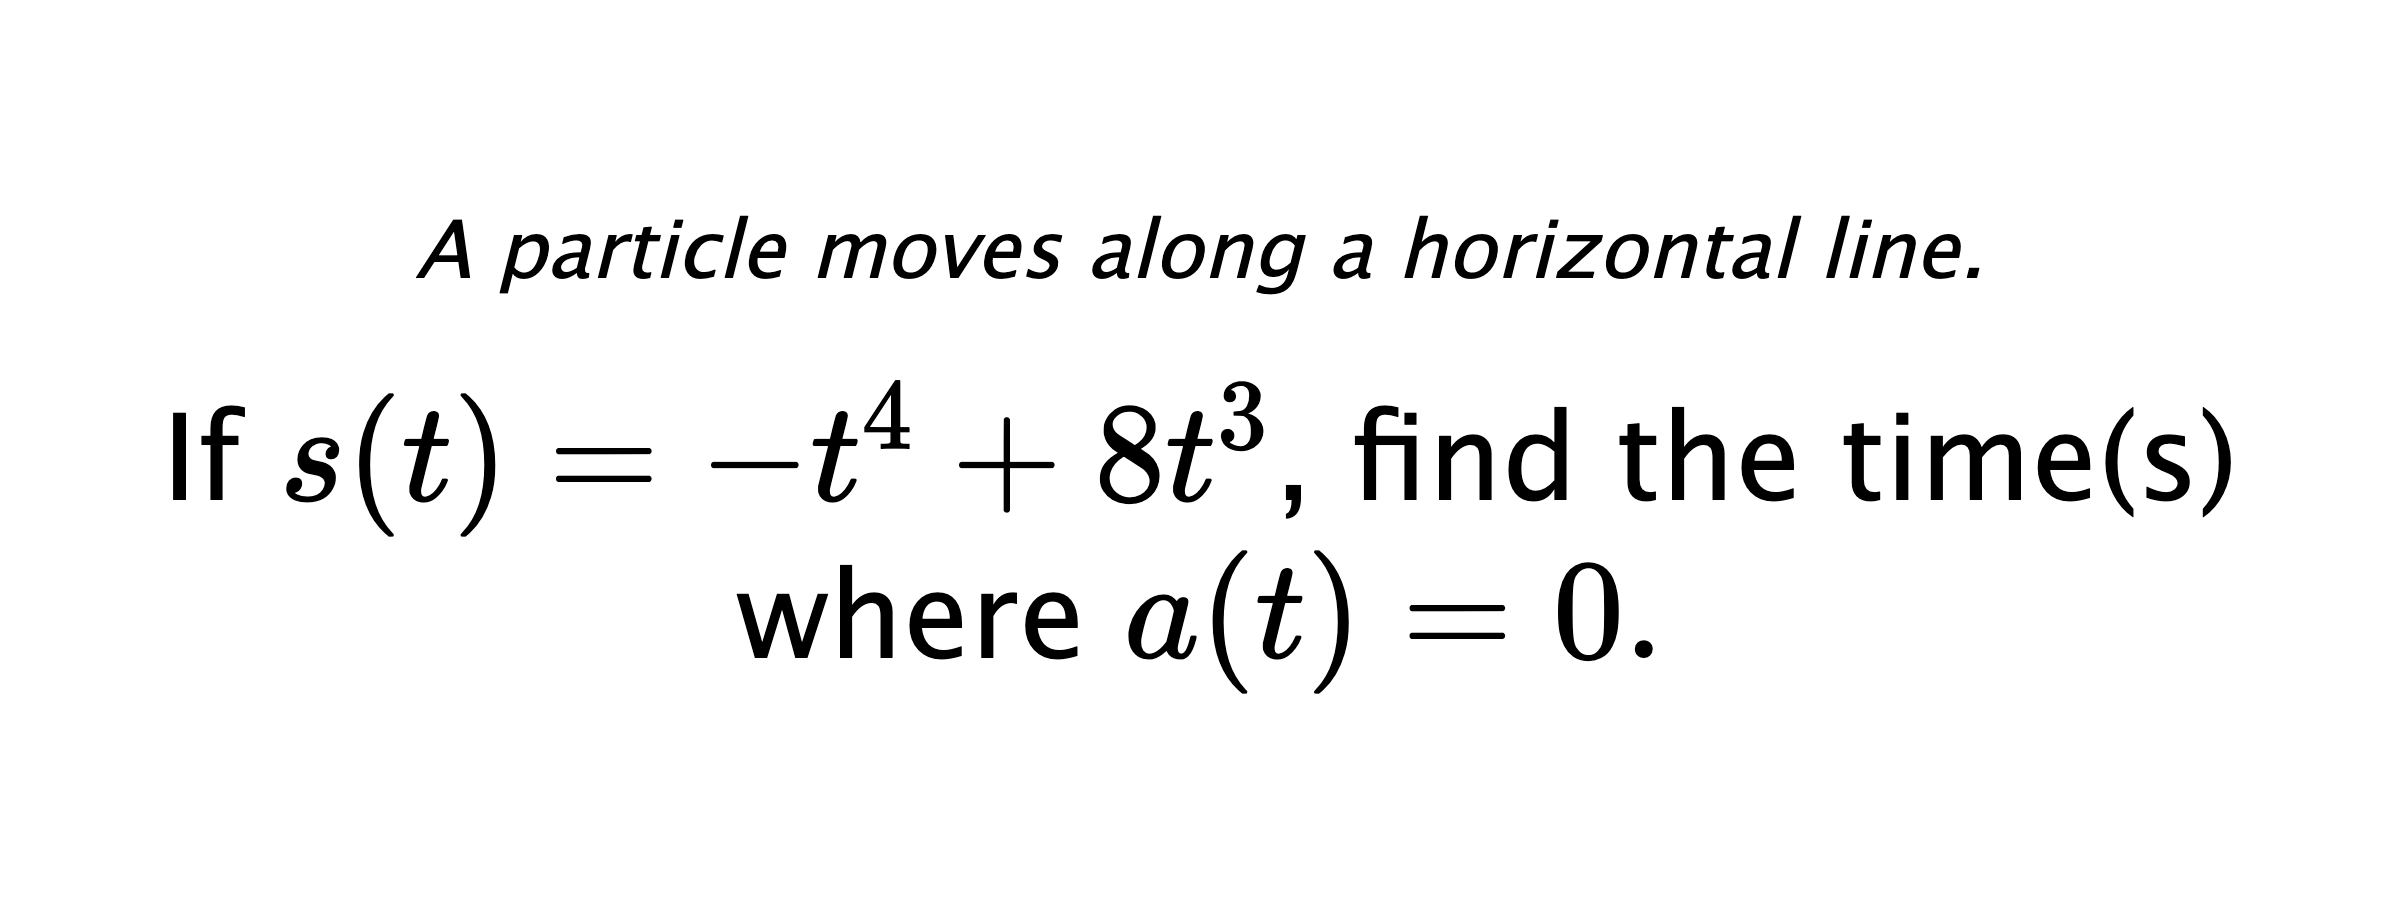 A particle moves along a horizontal line. If $ s(t)=-t^4+8t^3 $, find the time(s) where $ a(t)=0. $